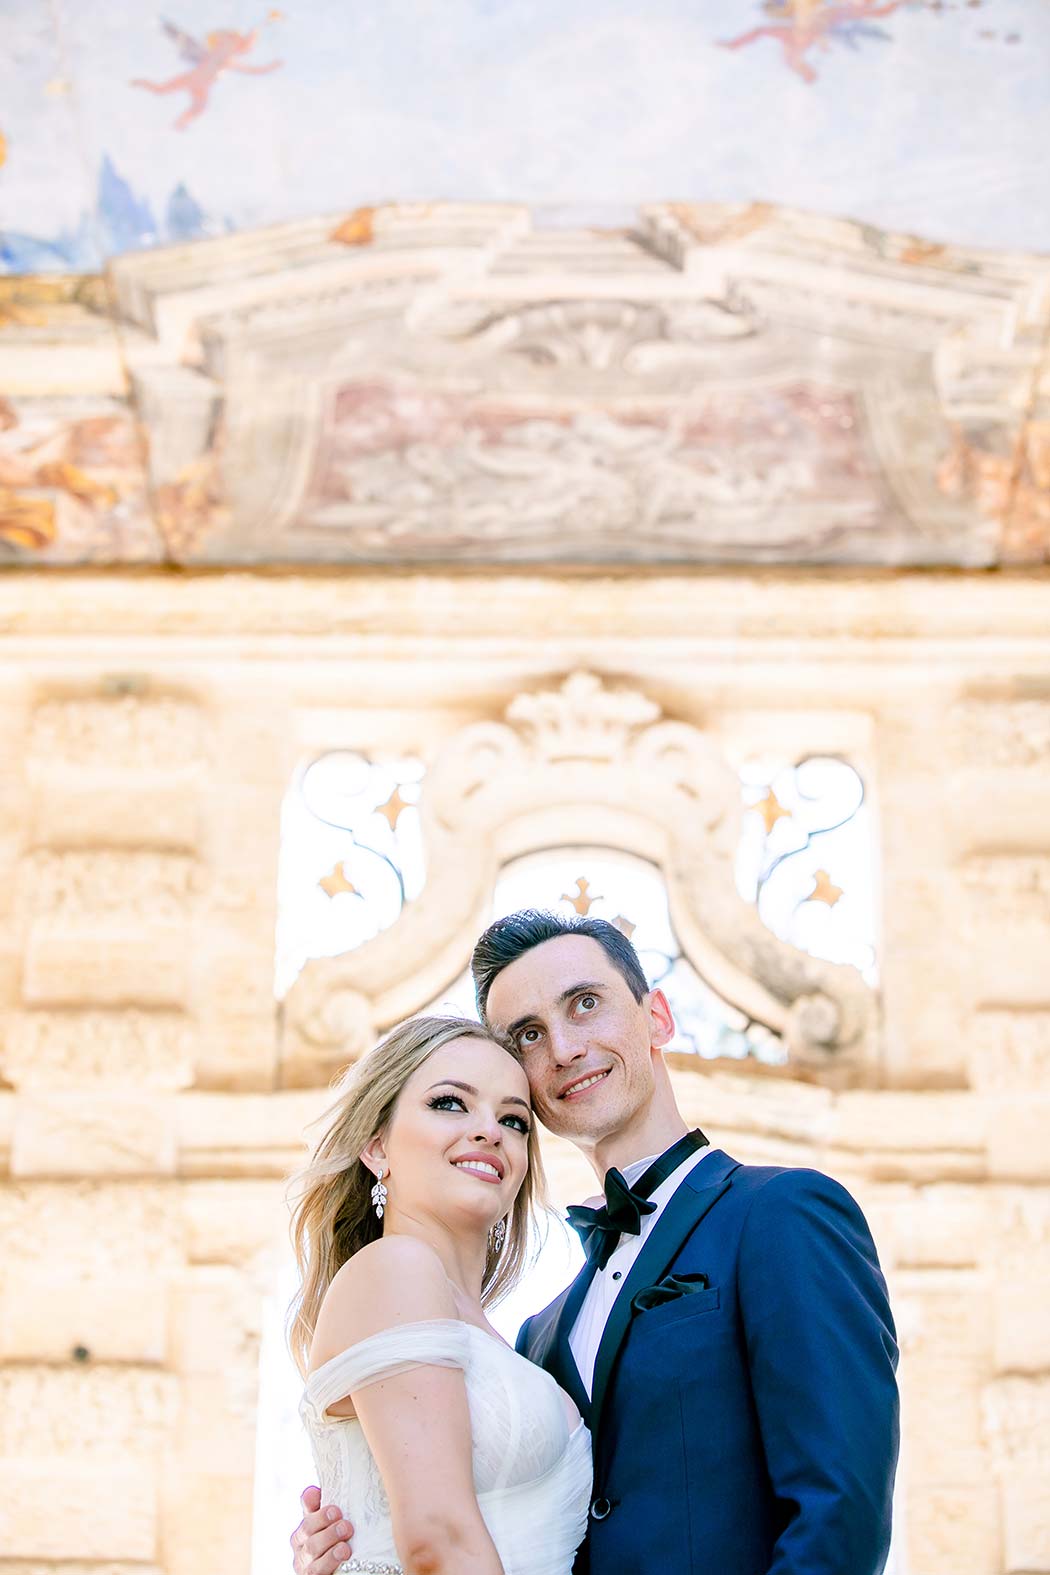 gorgeous couple's photography session vizcaya museum miami | couple pose for photoshoot at vizcaya